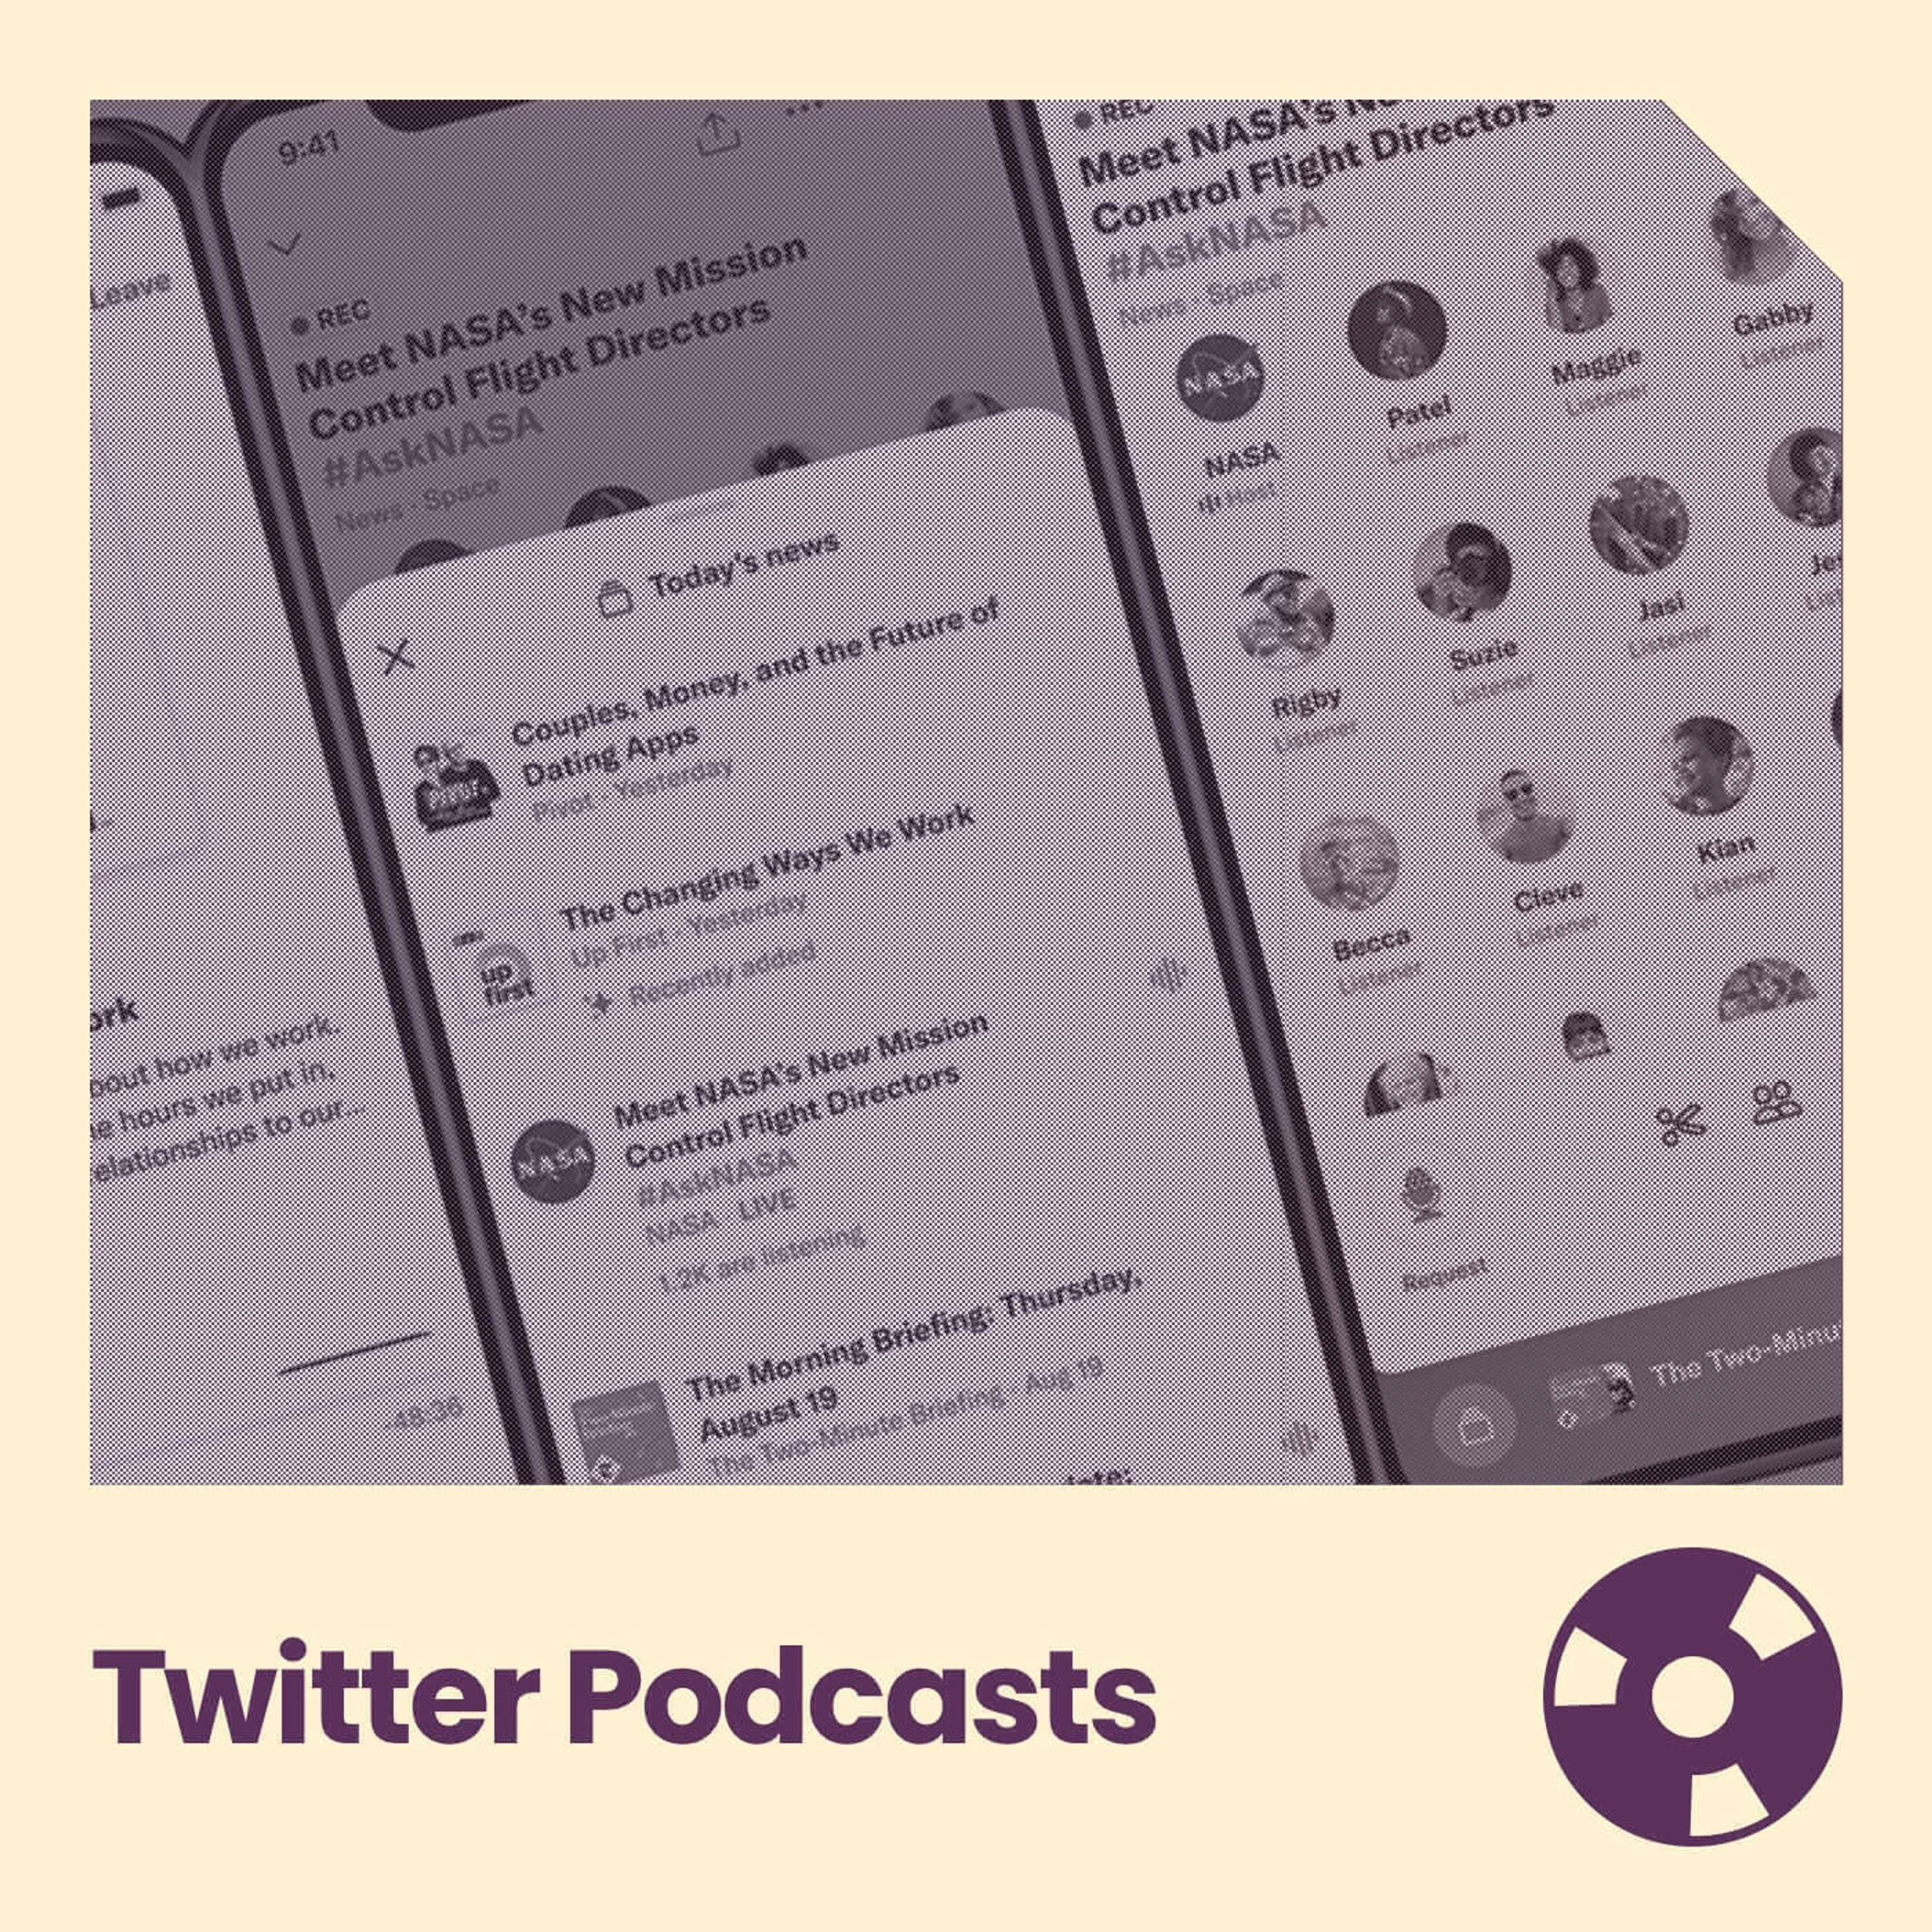 Why Twitter’s Podcast Feature May Not Be Good for Podcasters